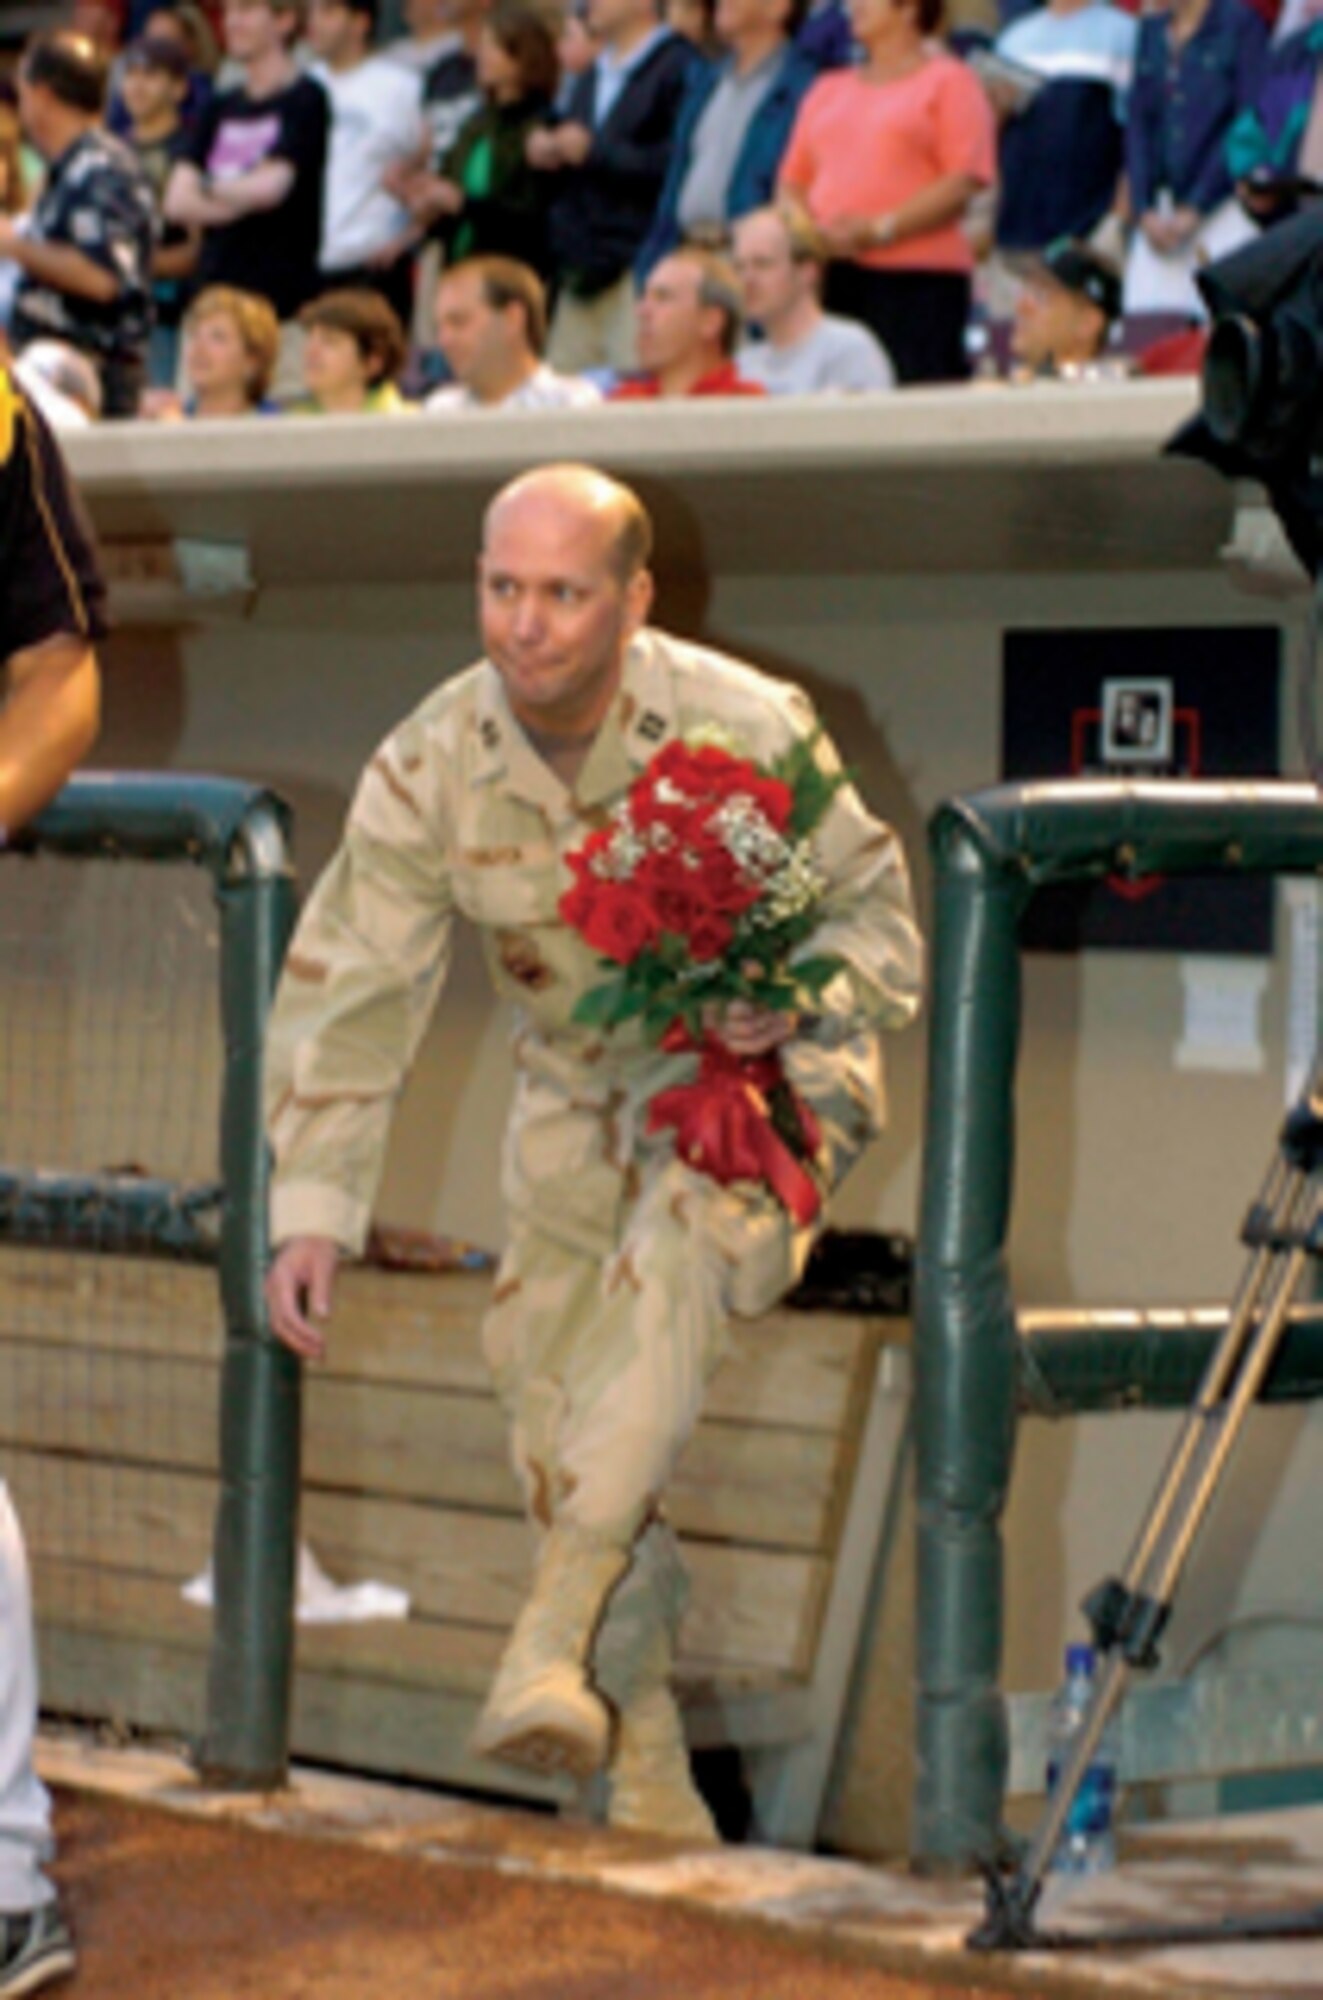 Having kept his return from a Middle East deployment under wraps, Capt. Jim Thigpen makes his way toward his unsuspecting family during the Dayton Dragons game at Fifth Third Field in Dayton, Ohio. (Photo courtesy of the Dayton Dragons)

